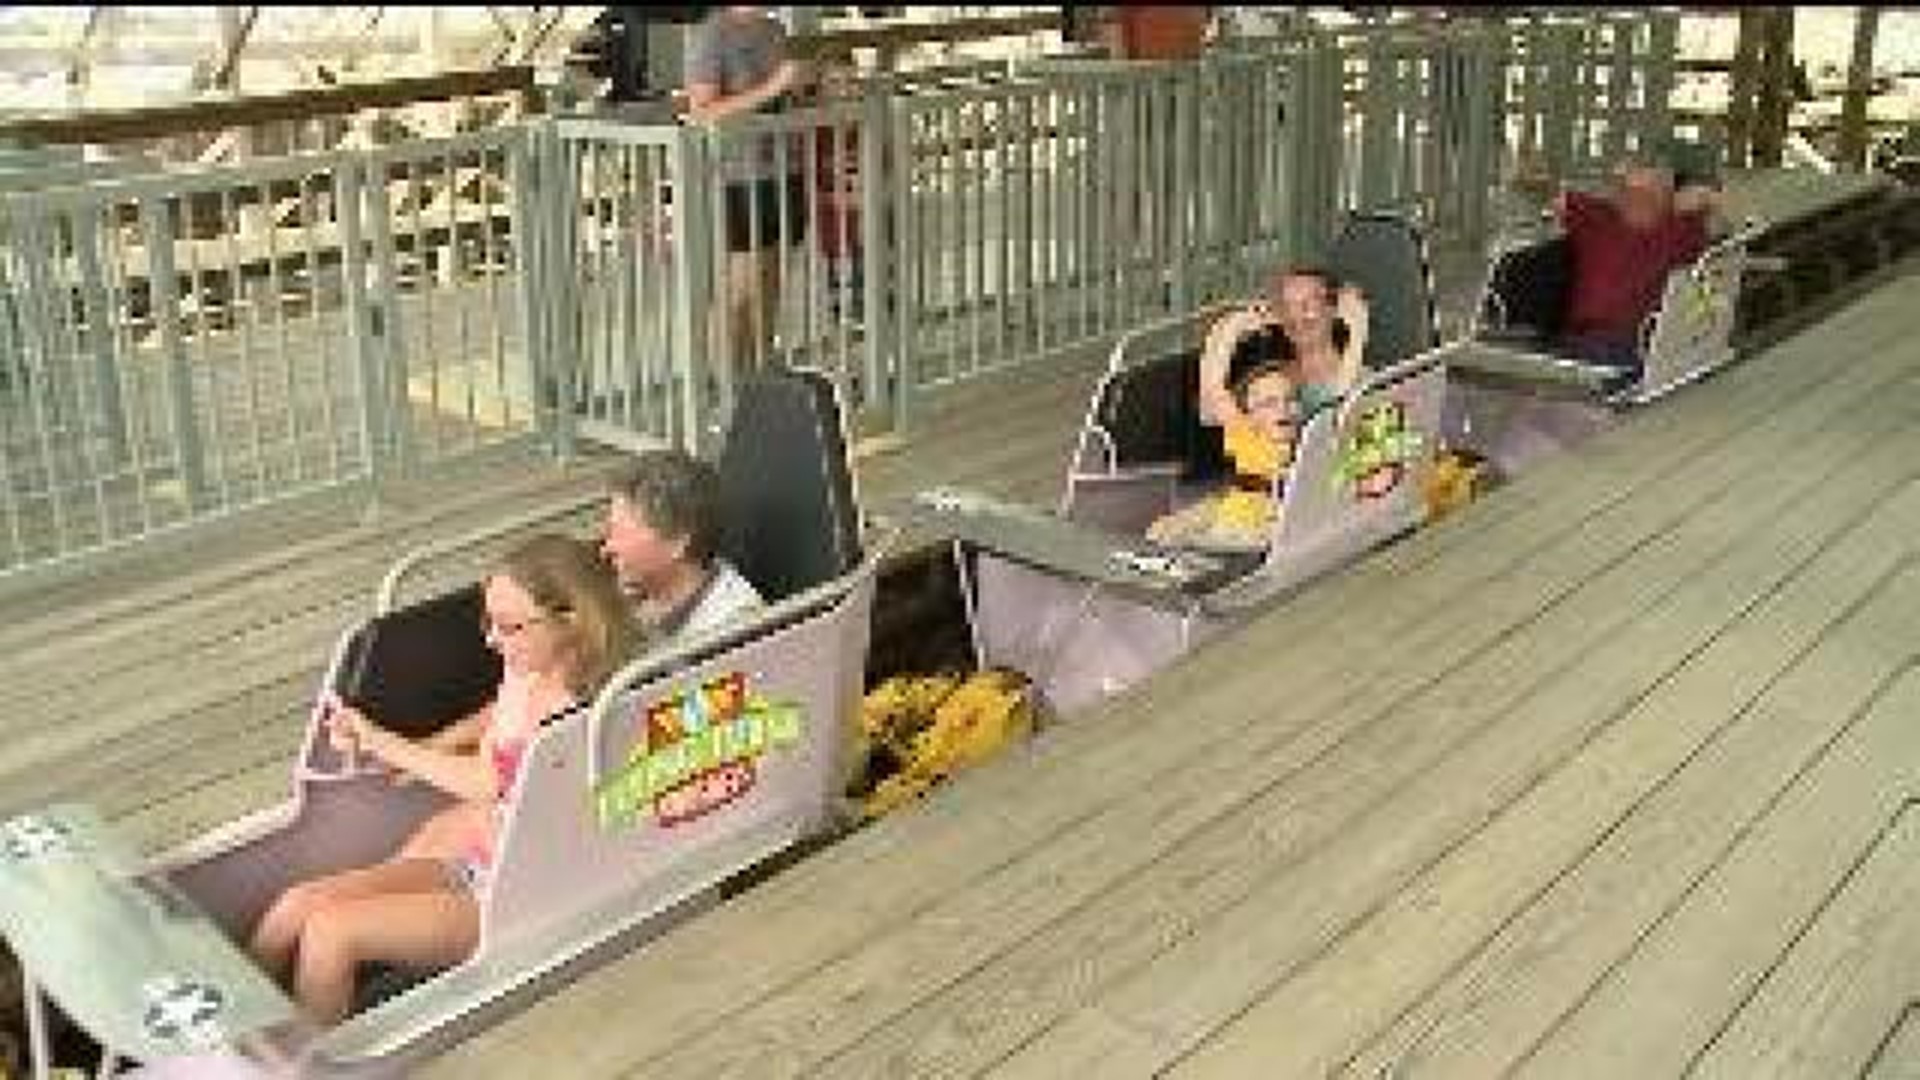 Staying Safe on Amusement Park Rides